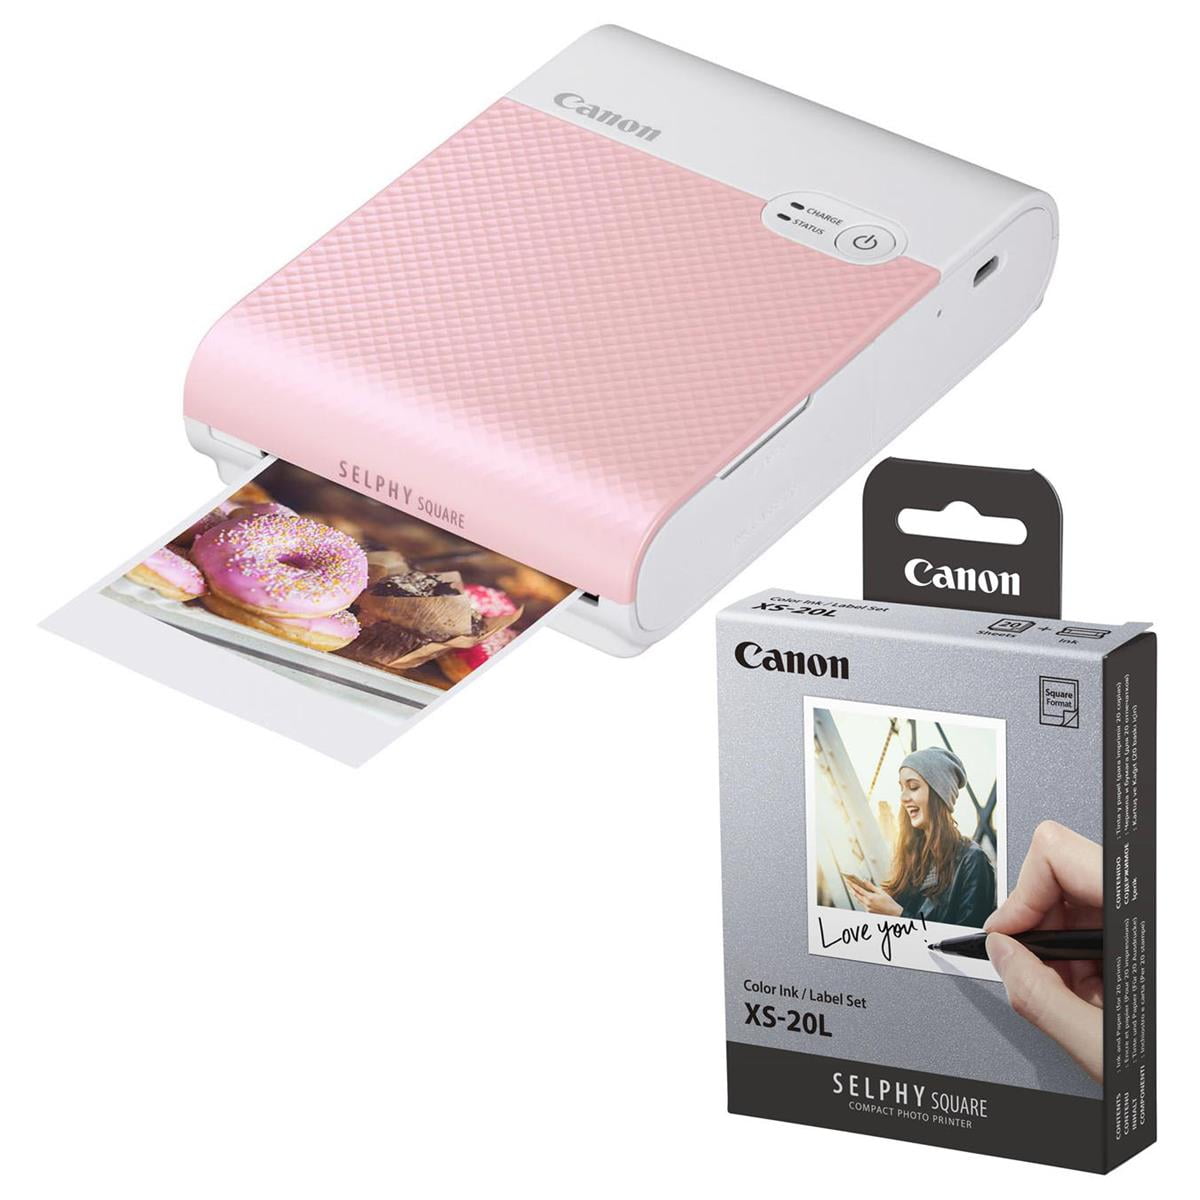 Compatible to Canon SELPHY Square Printer Canon SELPHY QX10 Compact Square Photo Printer Pink with Canon Color Ink/Label Set XS-20L 20 Sheets 